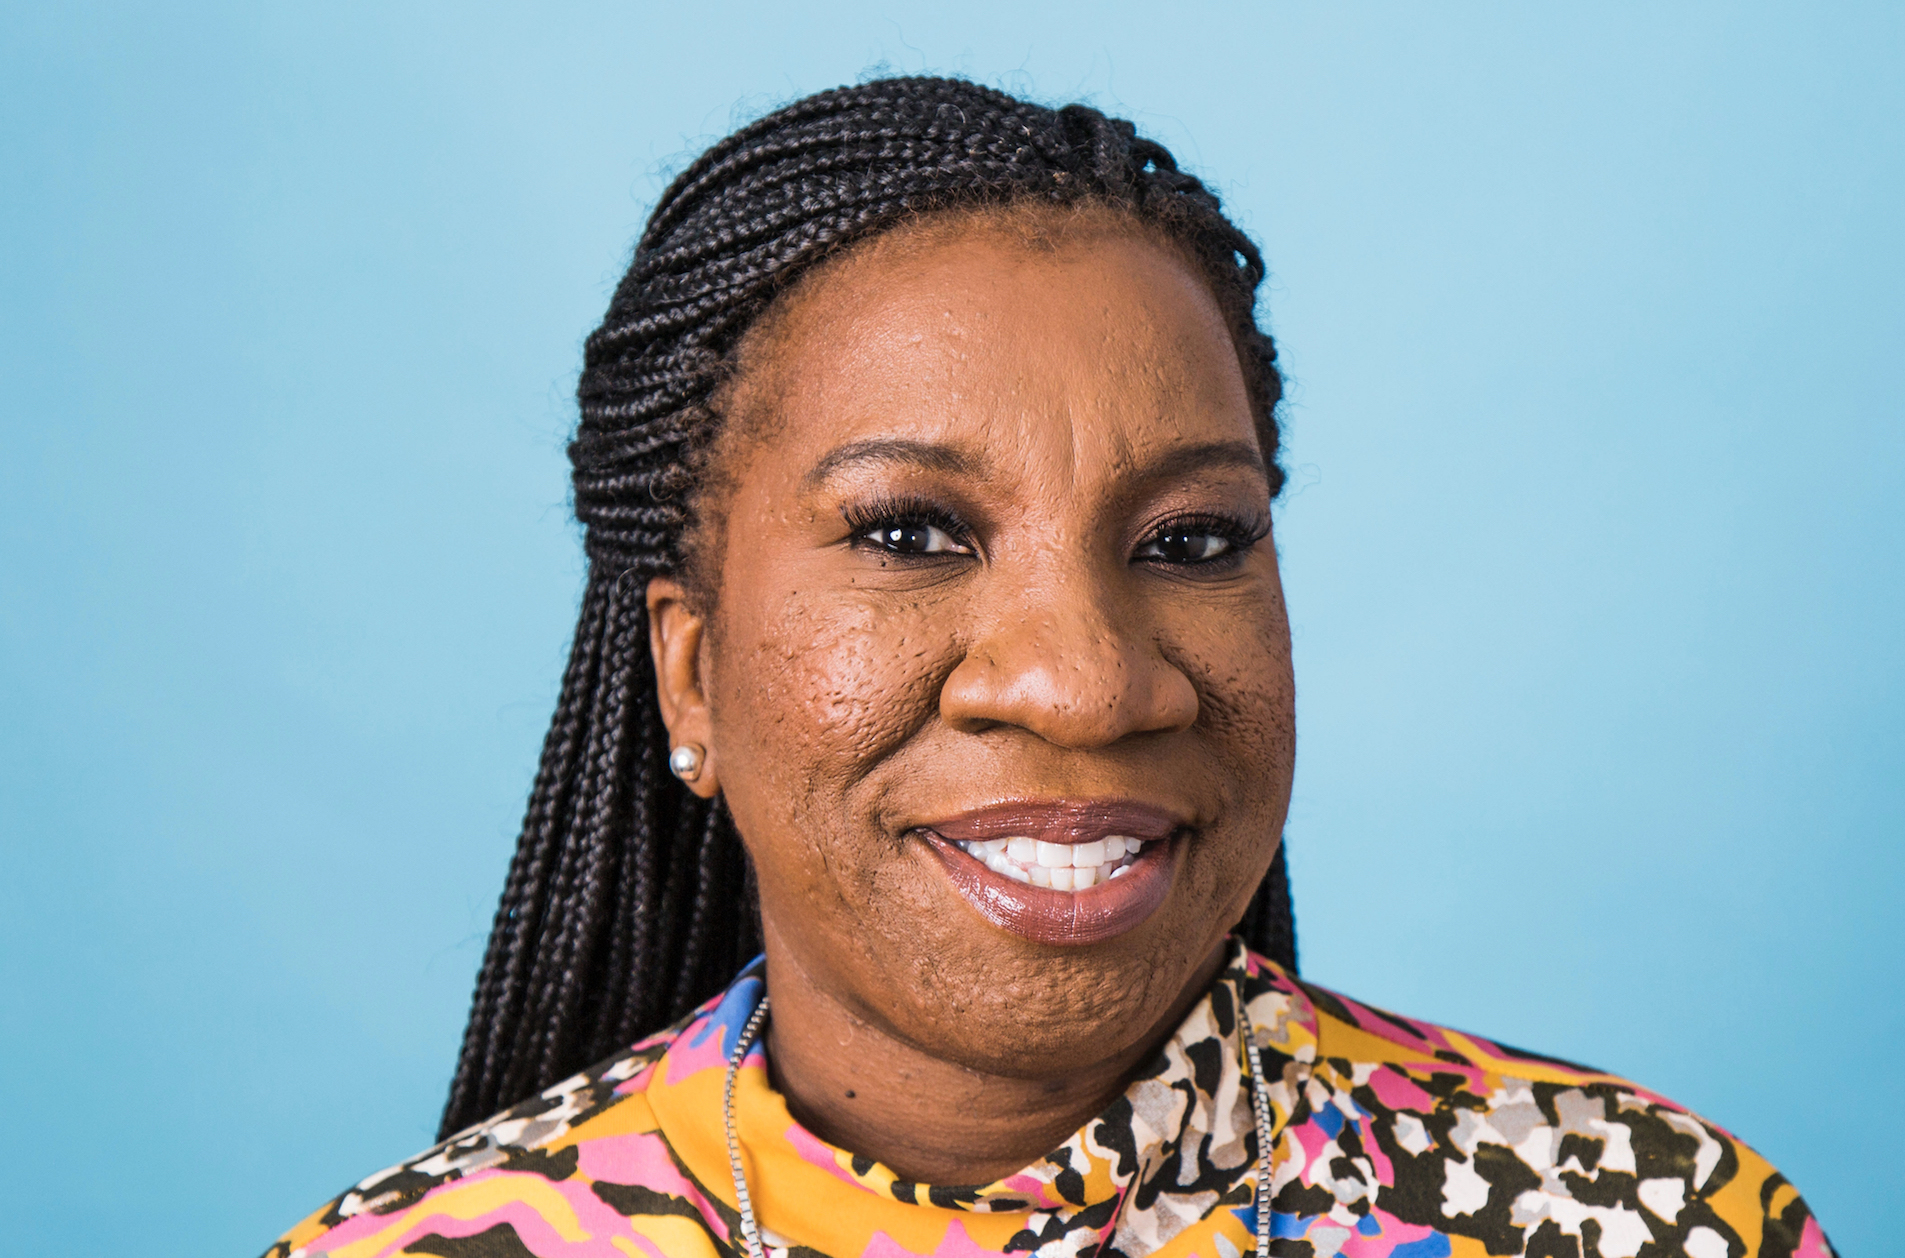 Civil Rights Activist and Founder of “Me Too” Movement Tarana Burke to